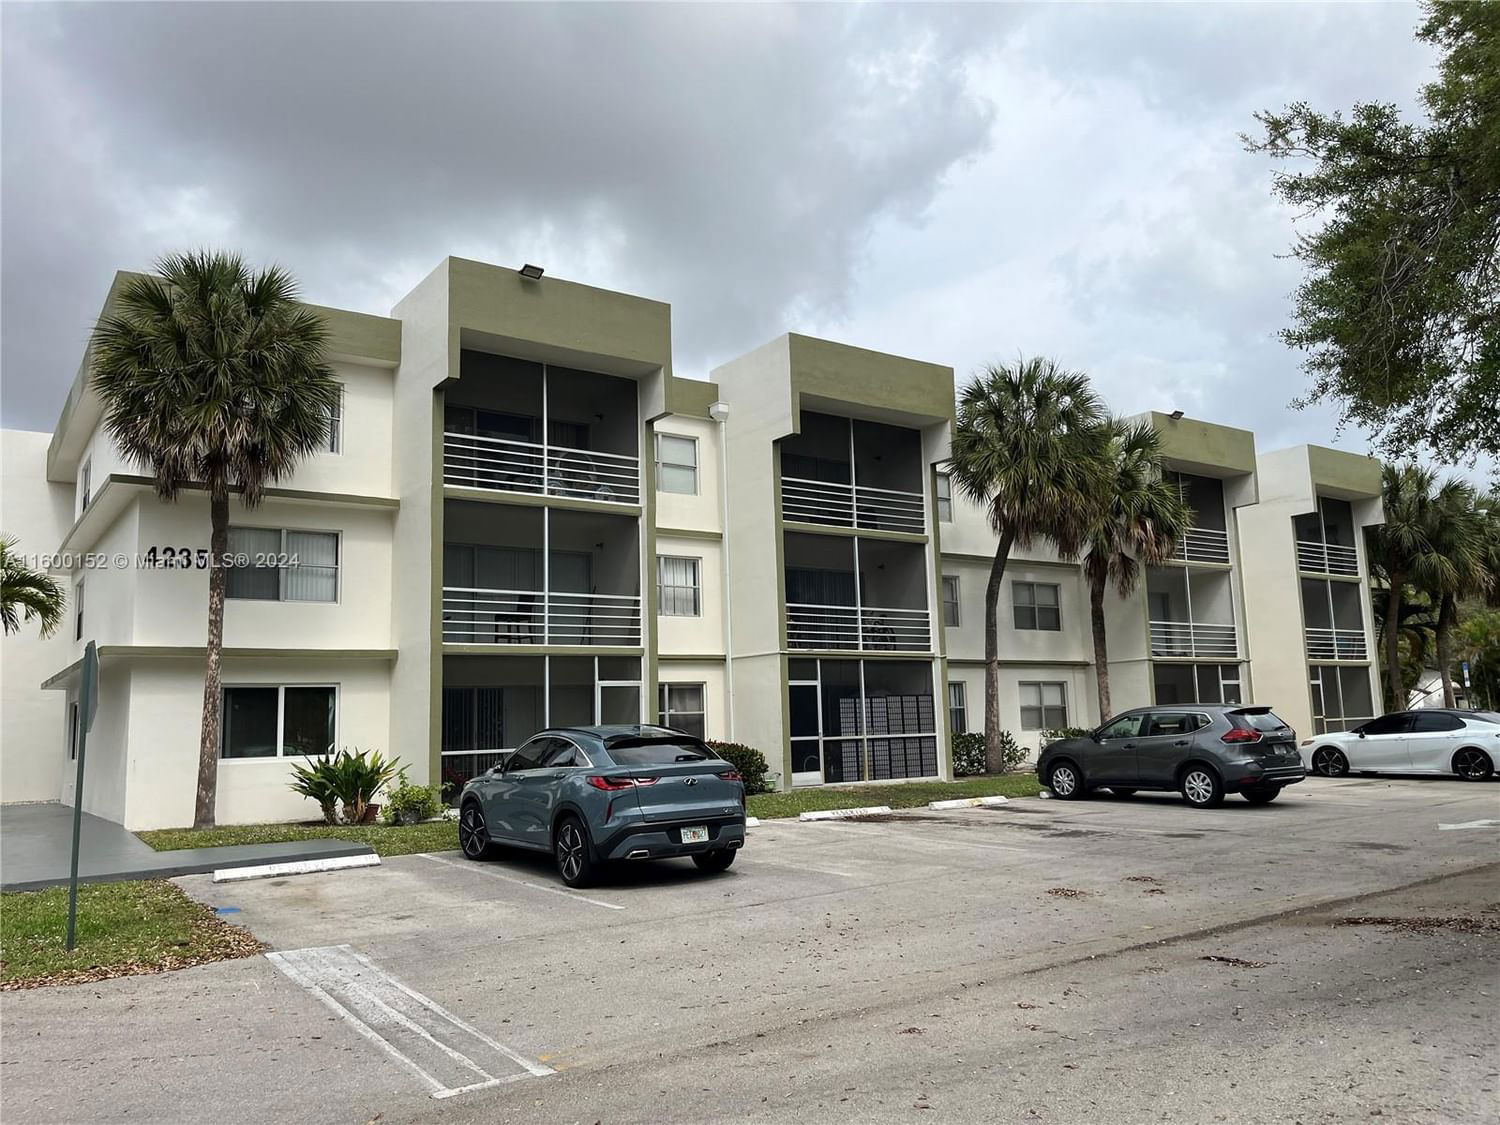 Real estate property located at 4235 University Dr #203, Broward County, SPRINGCREST CONDO, Sunrise, FL